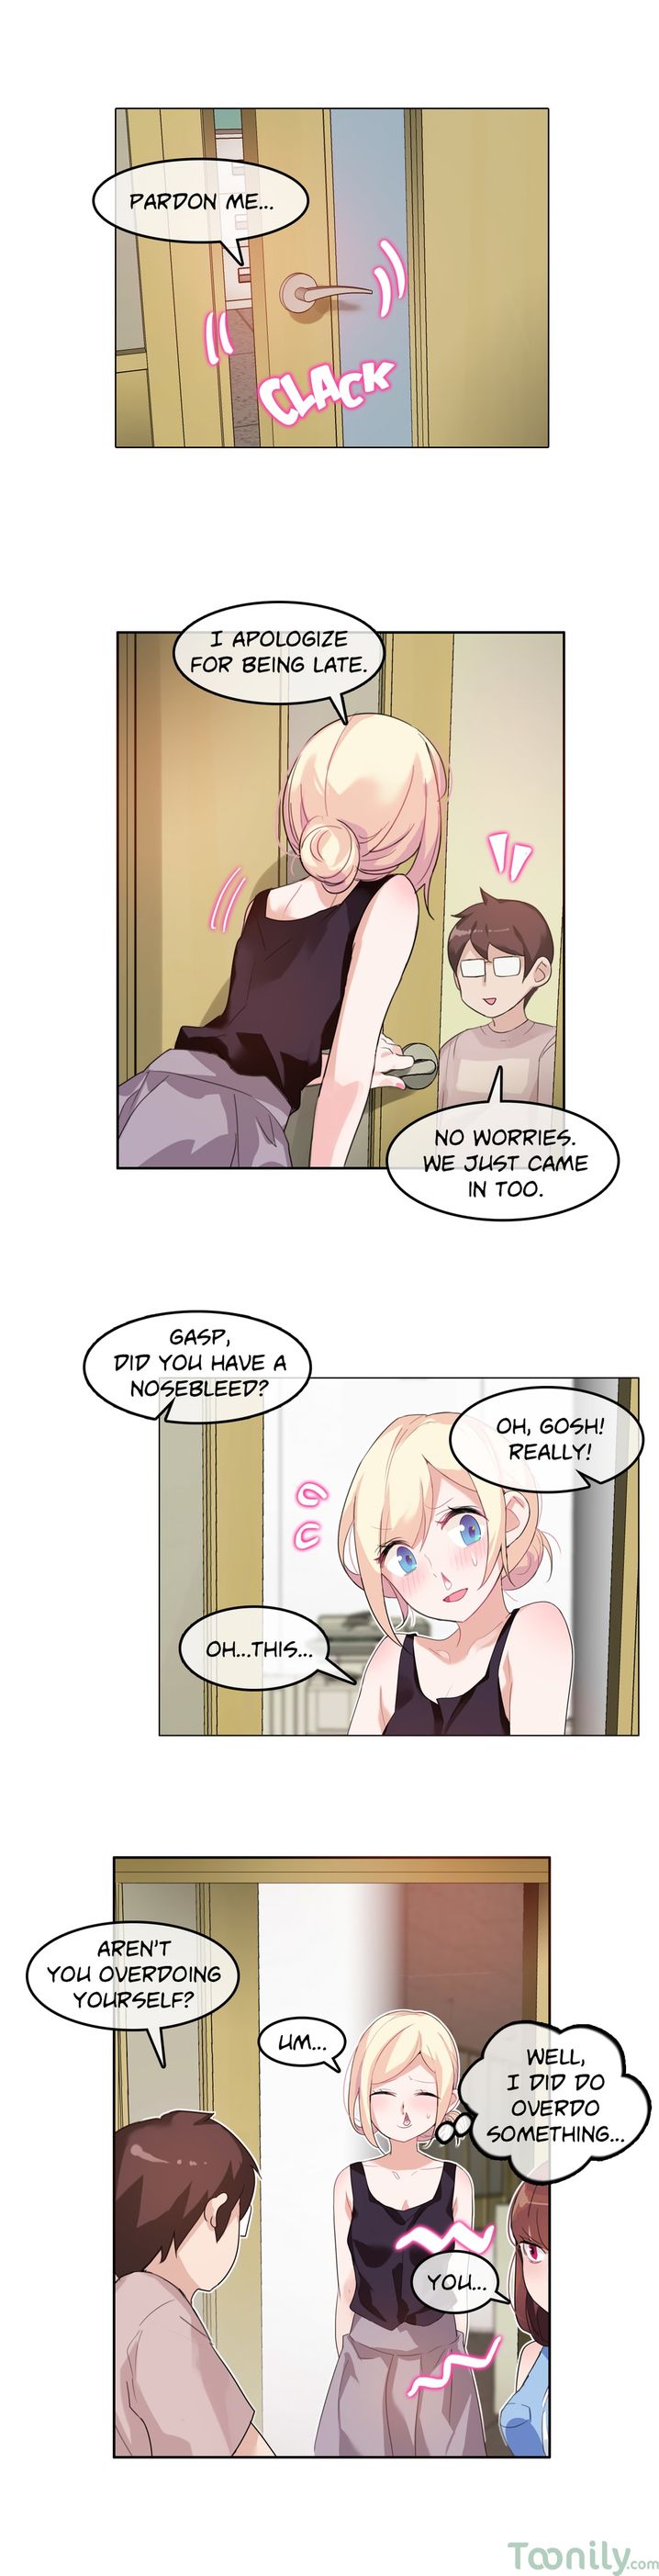 A Pervert’s Daily Life - Chapter 6 Page 1